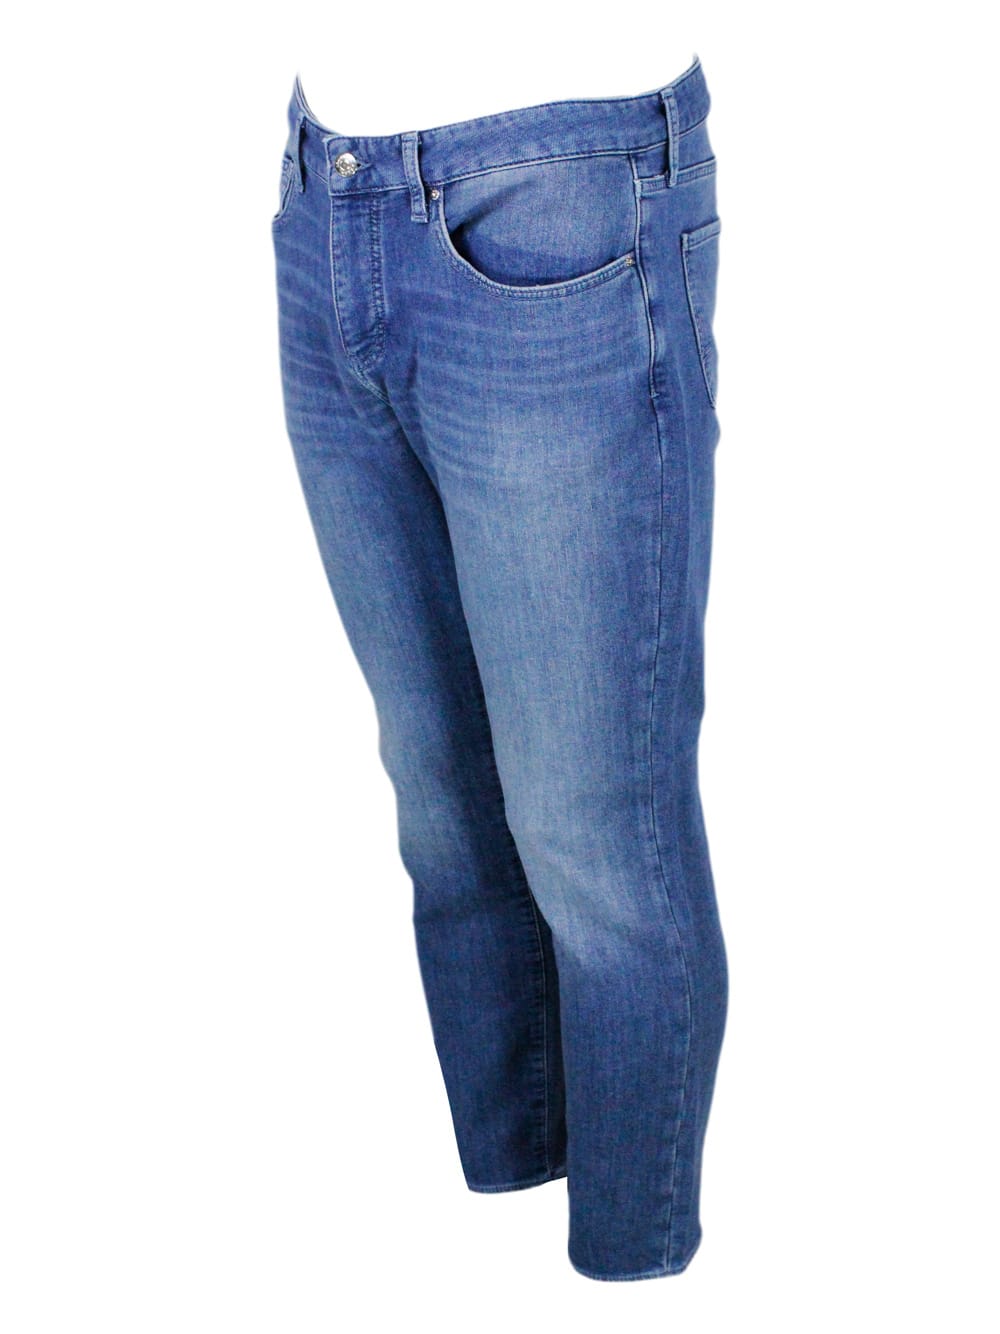 Shop Armani Collezioni Skinny Jeans In Soft Stretch Denim With Matching Stitching And Leather Tab. Zip And Button Closure